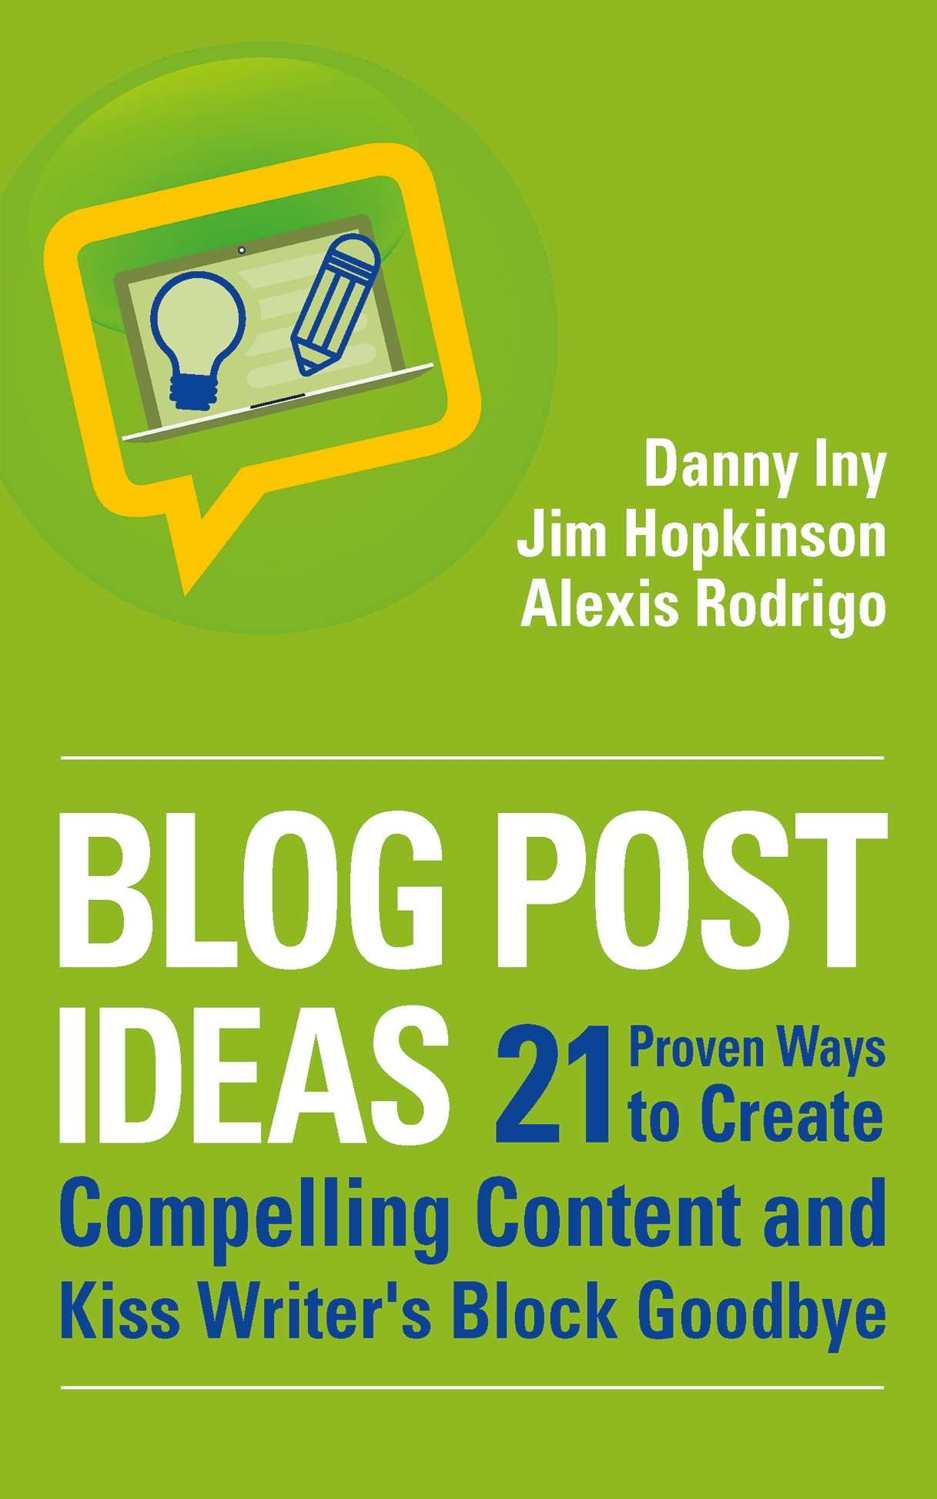 Blog Post Ideas: 21 Proven Ways to Create Compelling Content and Kiss Writer's Block Goodbye (Business Reimagined Series)